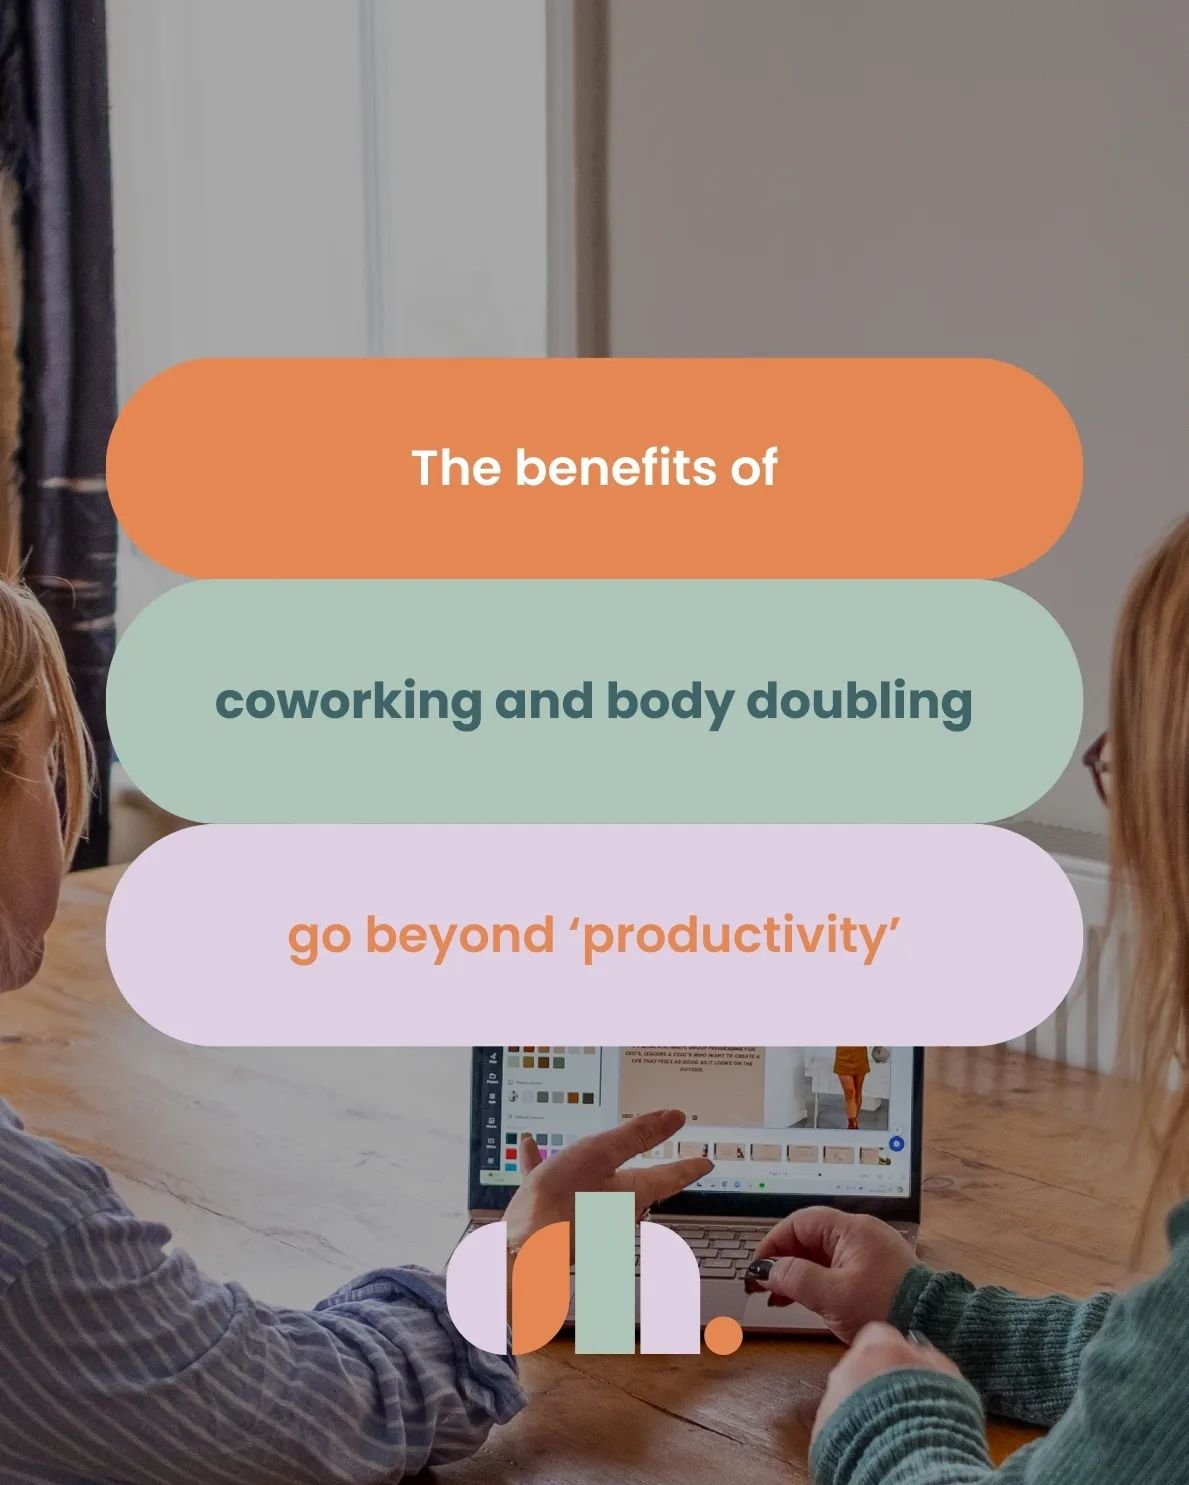 If you're feeling lonely, isolated, or just a bit stuck - coworking or body doubling could be a great way to make some shifts.

Through coworking / body doubling, I&rsquo;ve helped my clients to..

☆ develop new projects from sparks of inspiration ✨️